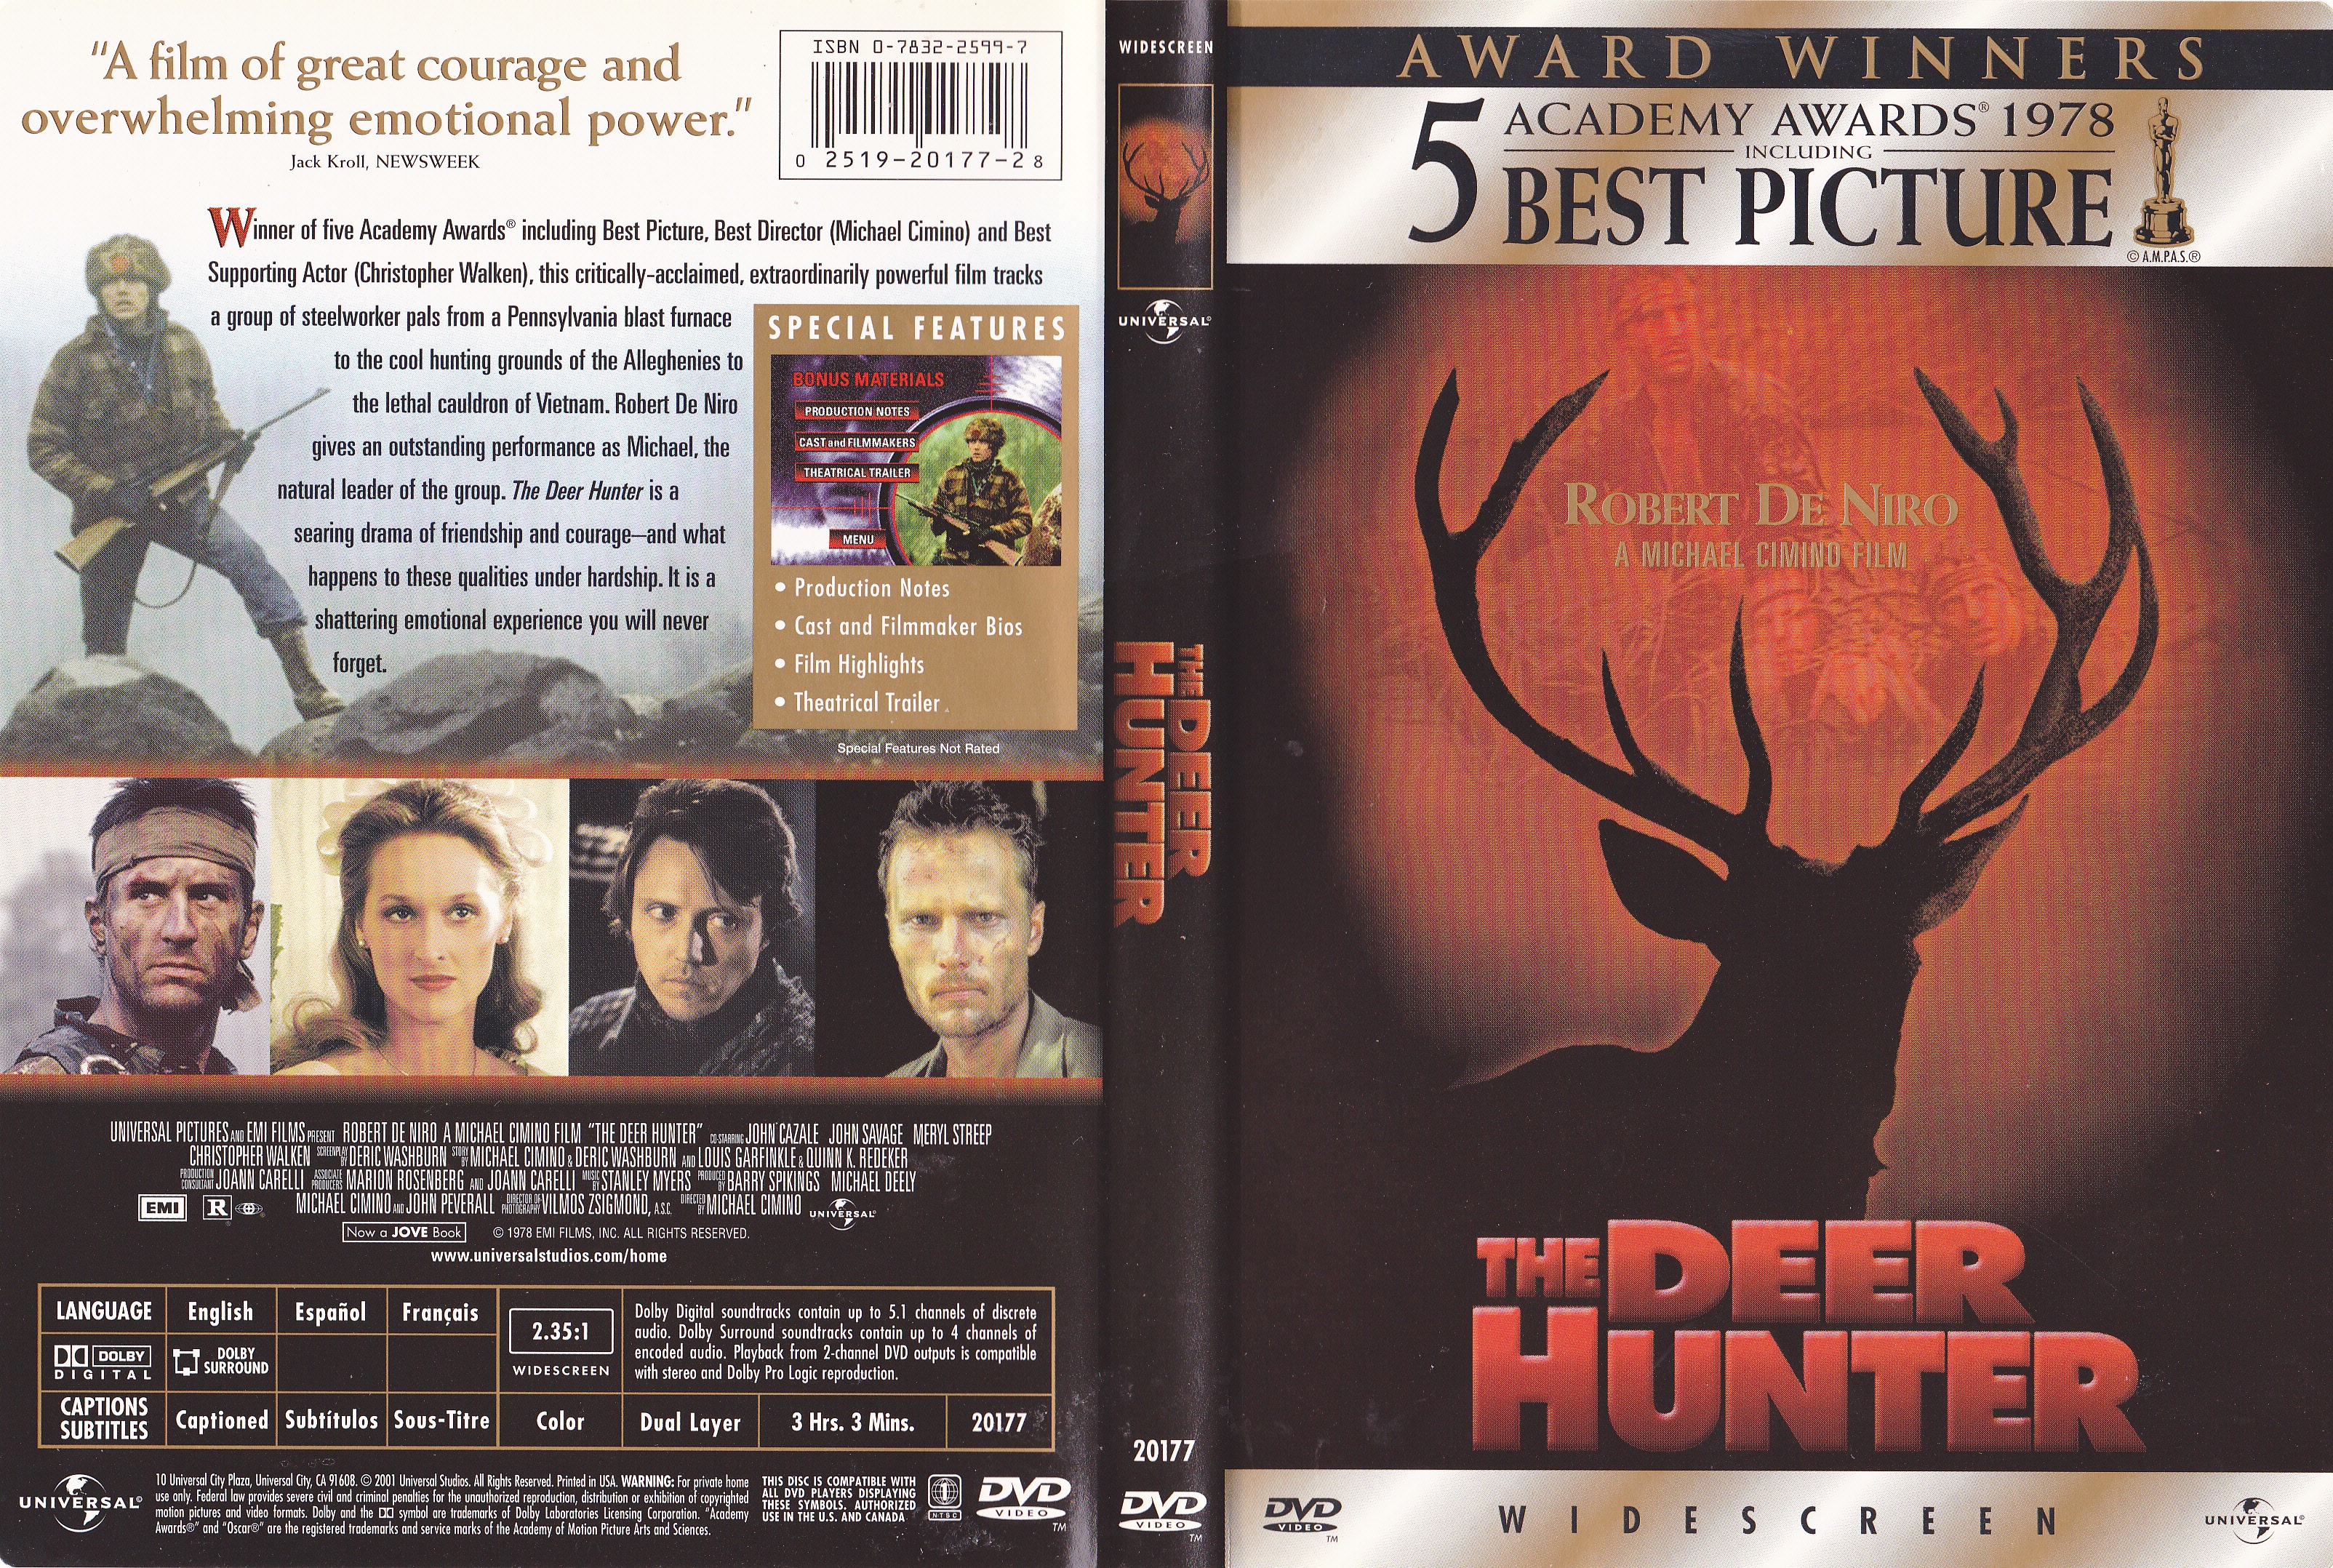 Jaquette DVD The deer hunter (Canadienne)